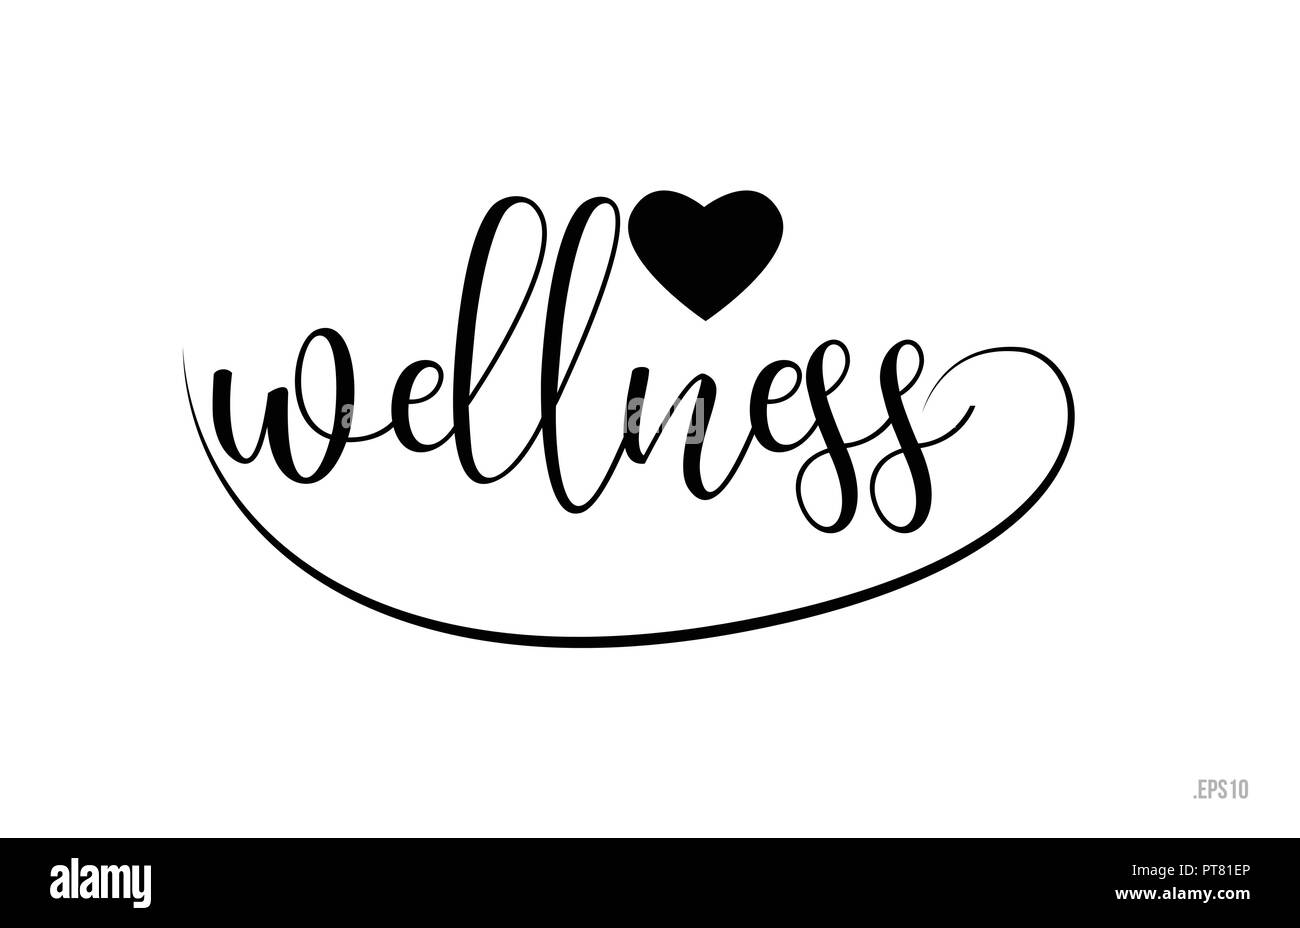 wellness word text with black and white love heart suitable for card, brochure or typography logo design Stock Vector